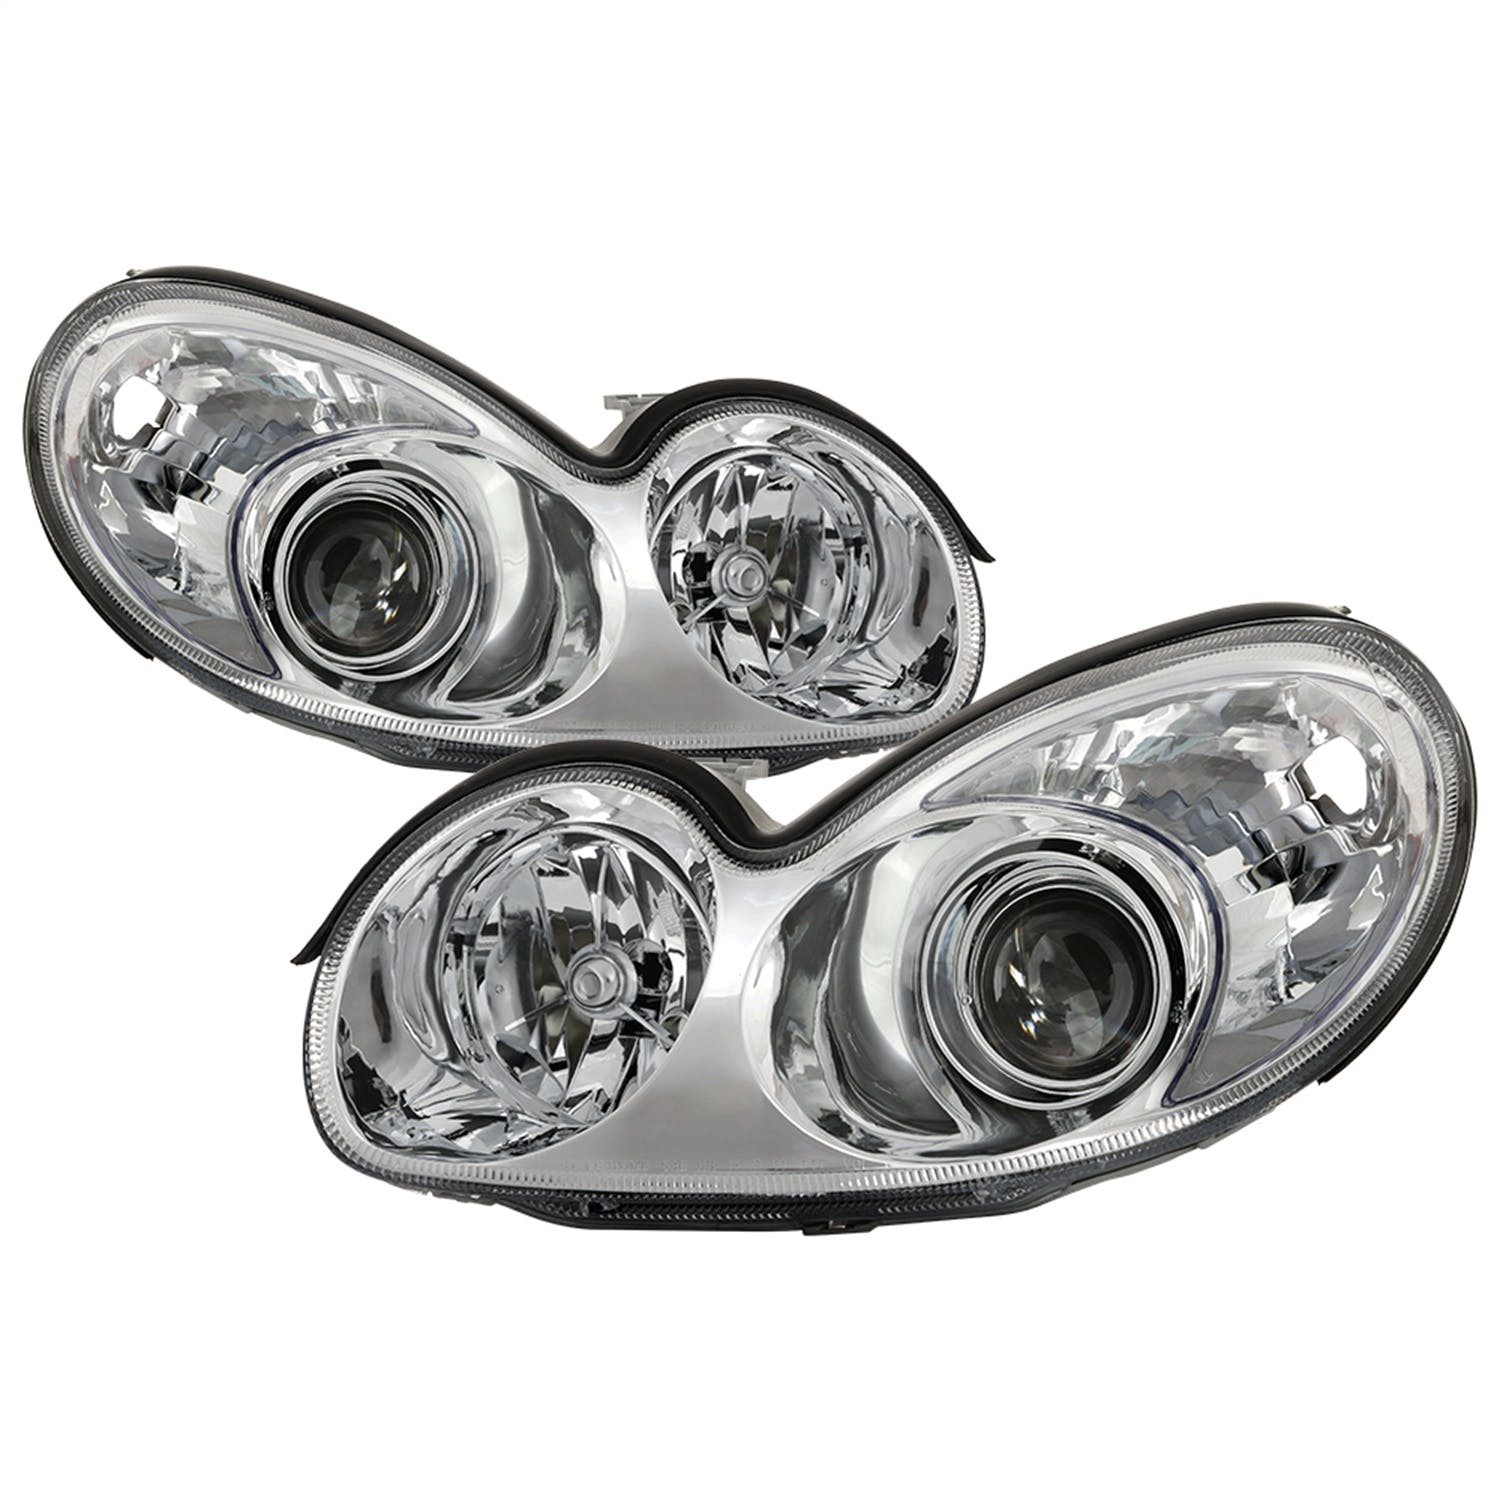 XTUNE POWER 9042744 Hyundai Sonata 02 05 OEM Style Headlights Low Beam H7(Not Included) ; High Beam H1(Not Included) ; Signal 2357A(Not Included) Chrome